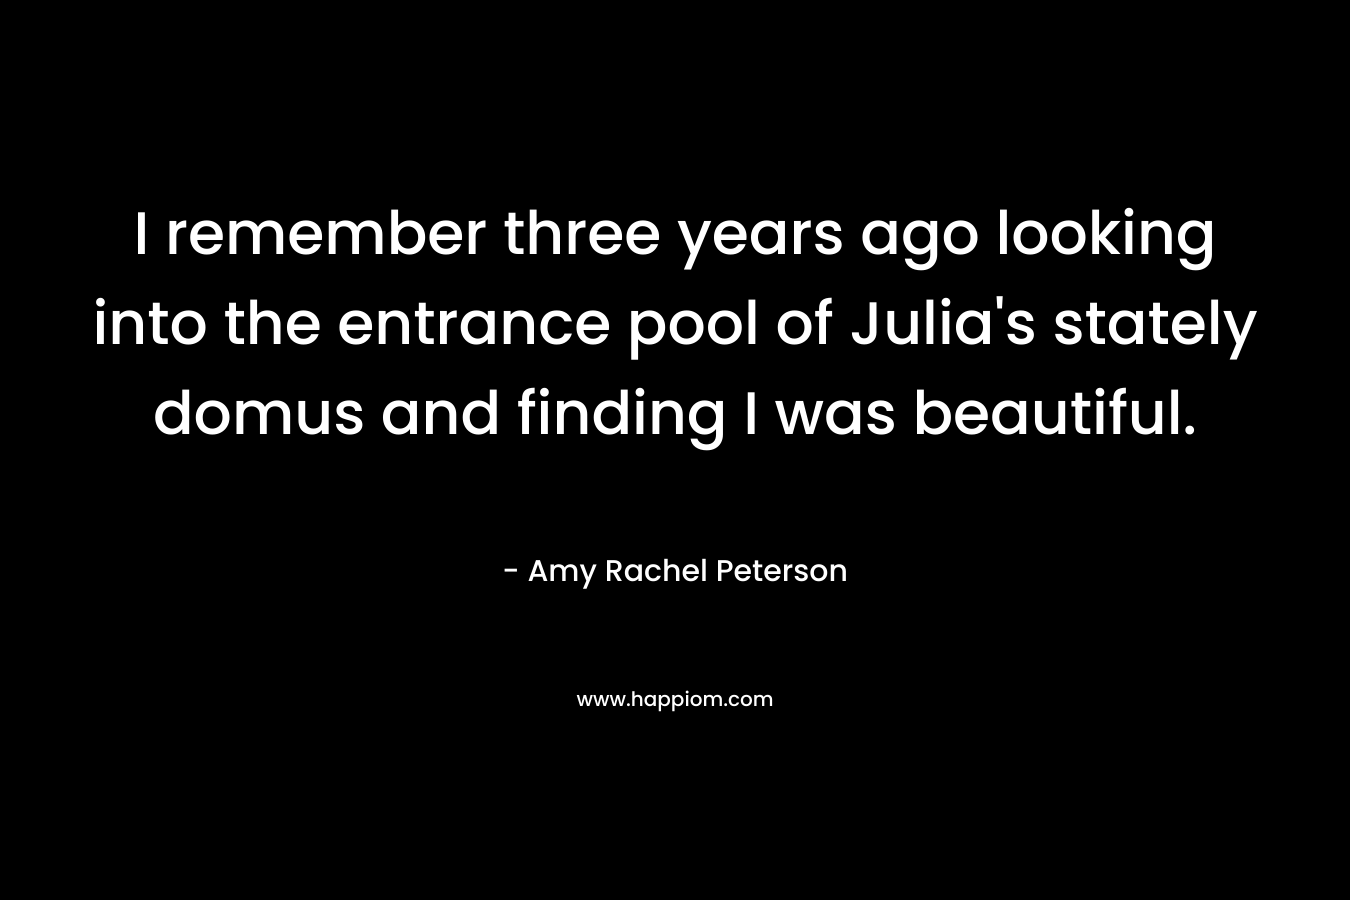 I remember three years ago looking into the entrance pool of Julia's stately domus and finding I was beautiful.